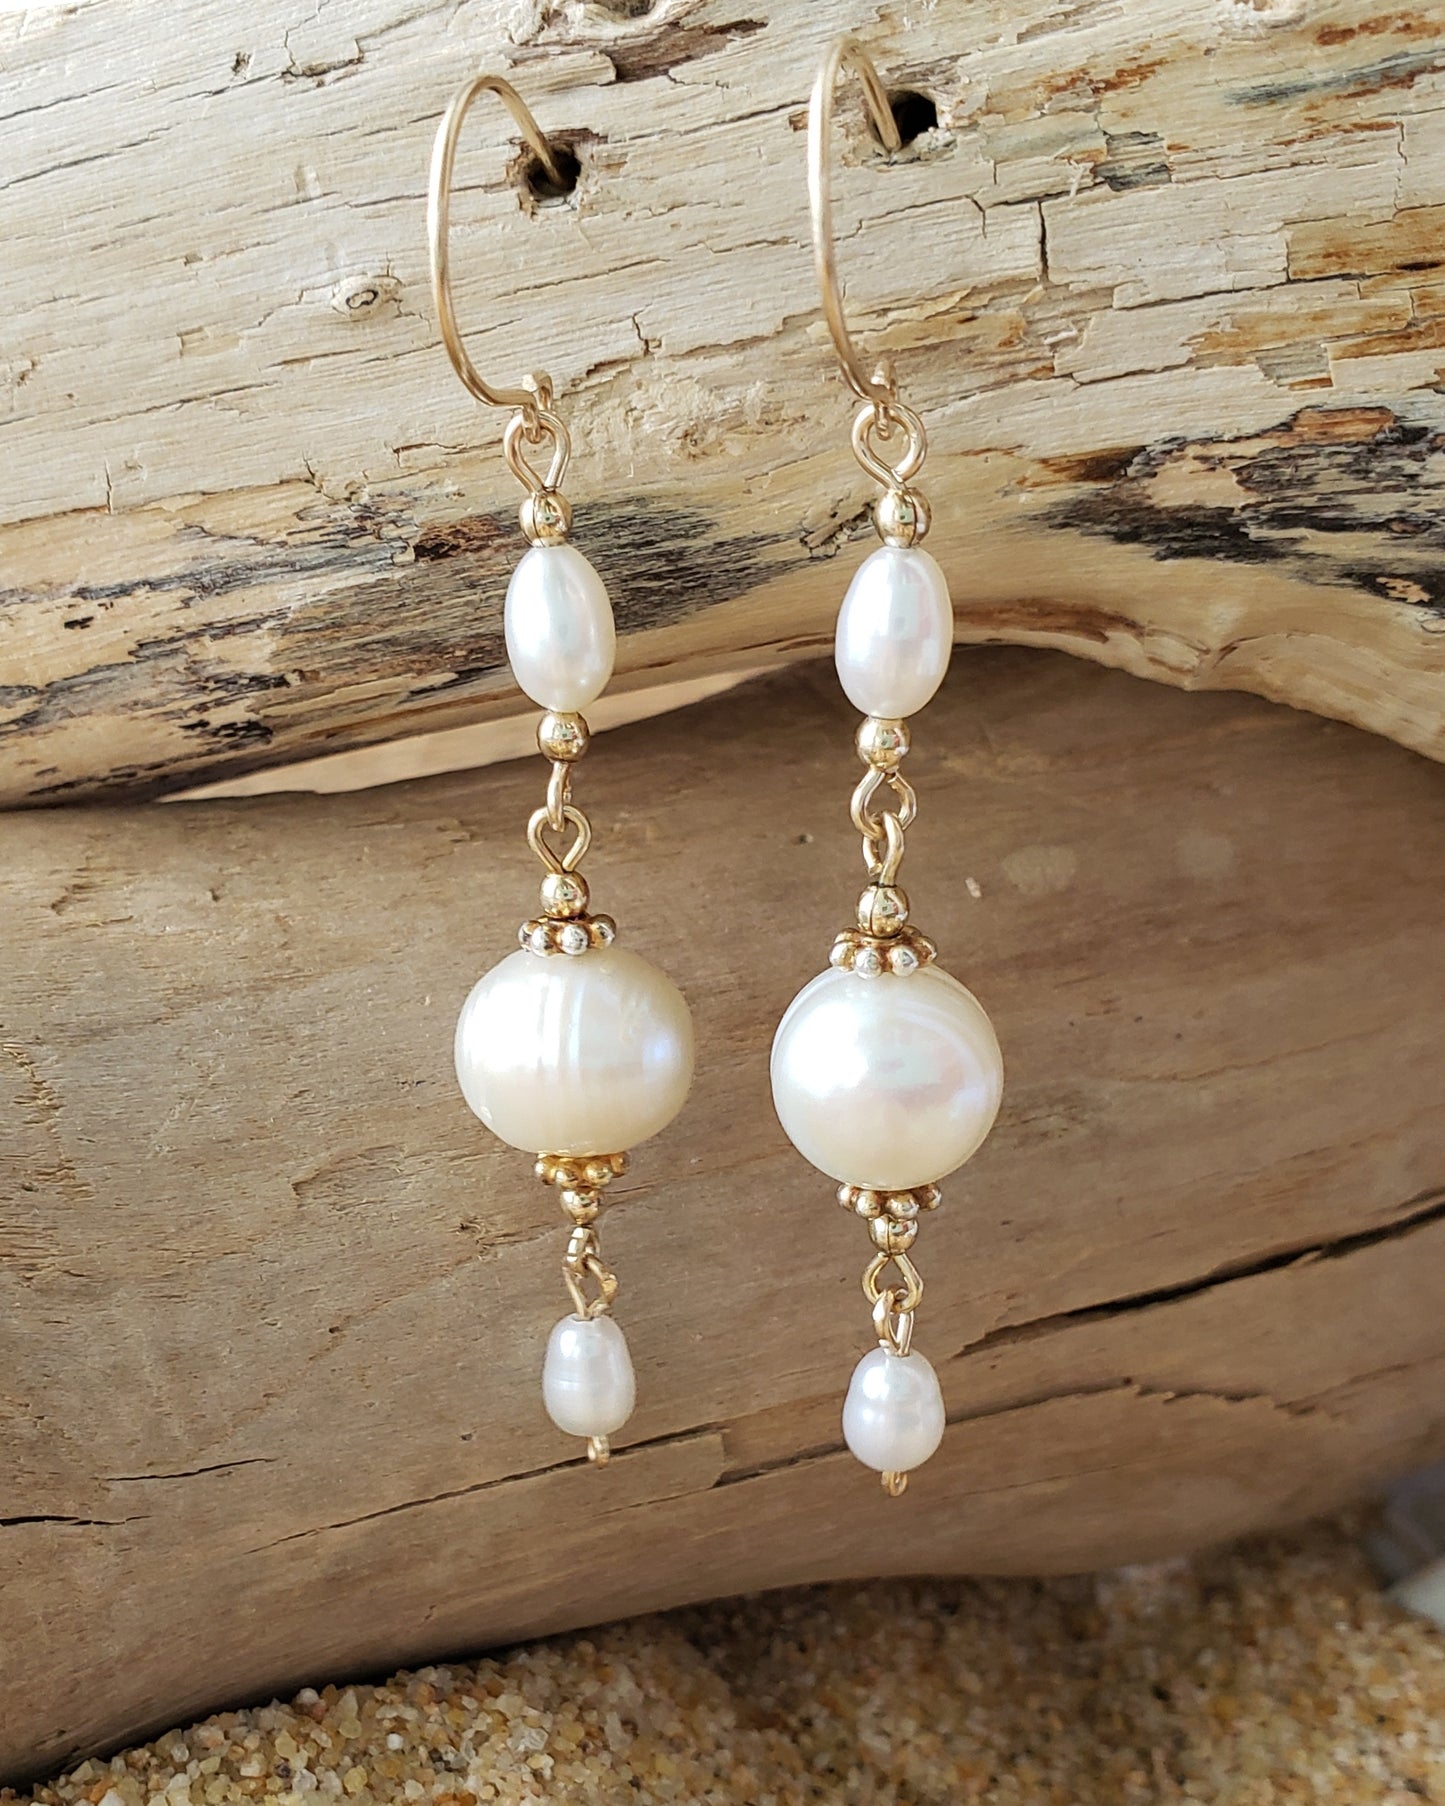 Long Harmony Pearl Earrings, Long Pearl Earrings made with 14k Gold Filled and white Freshwater Cultured Pearls